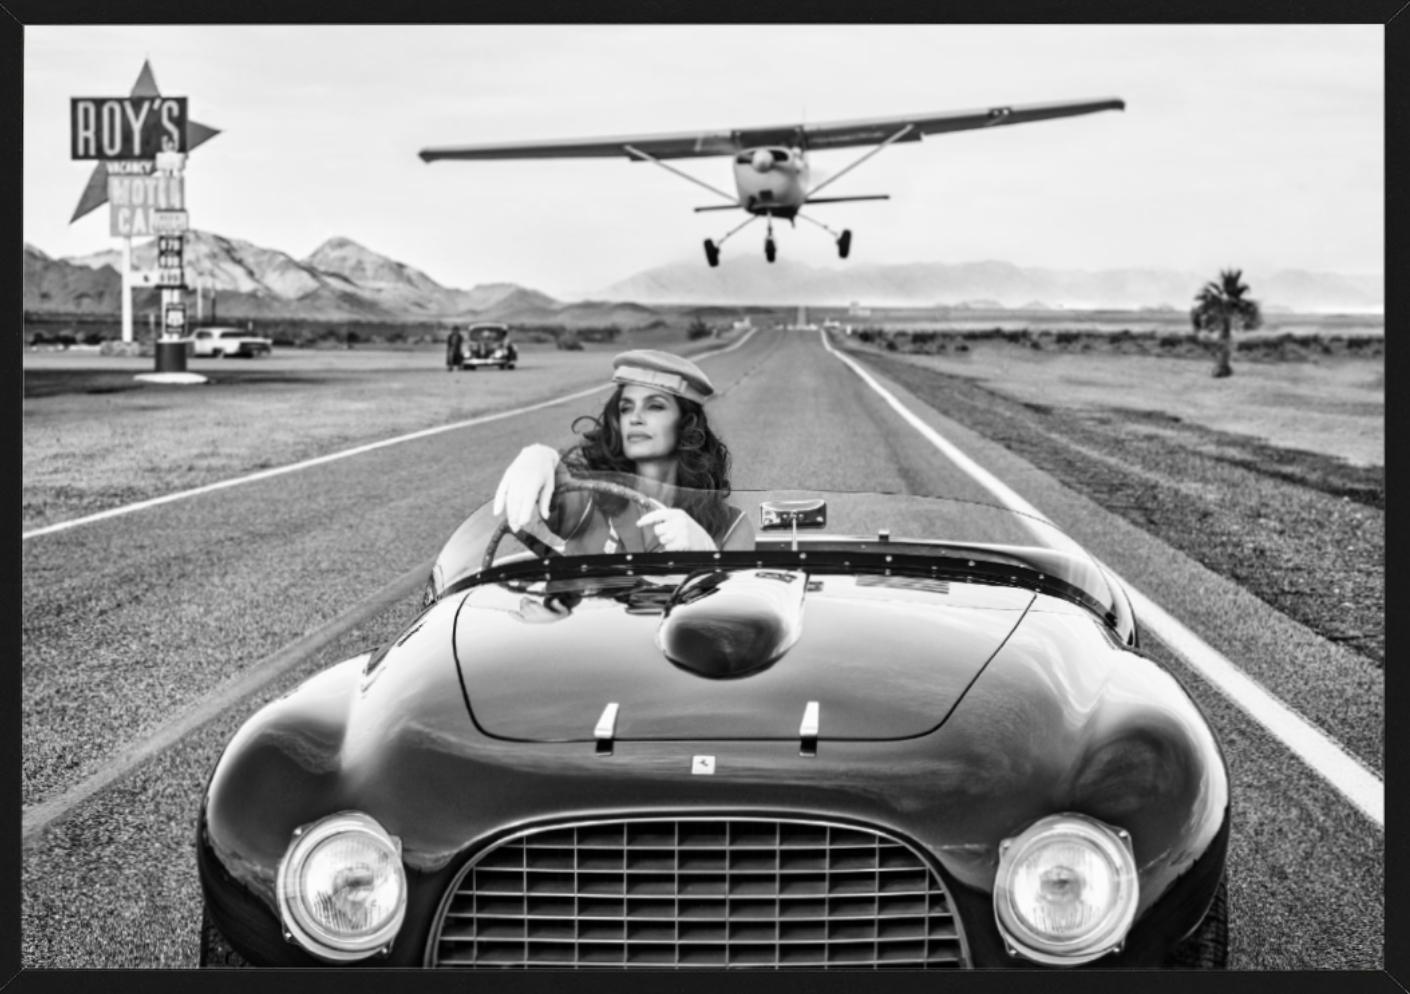 South by Southwest - Supermodel Cindy Crawford in vintage Ferrari on route 66 - Photograph by David Yarrow